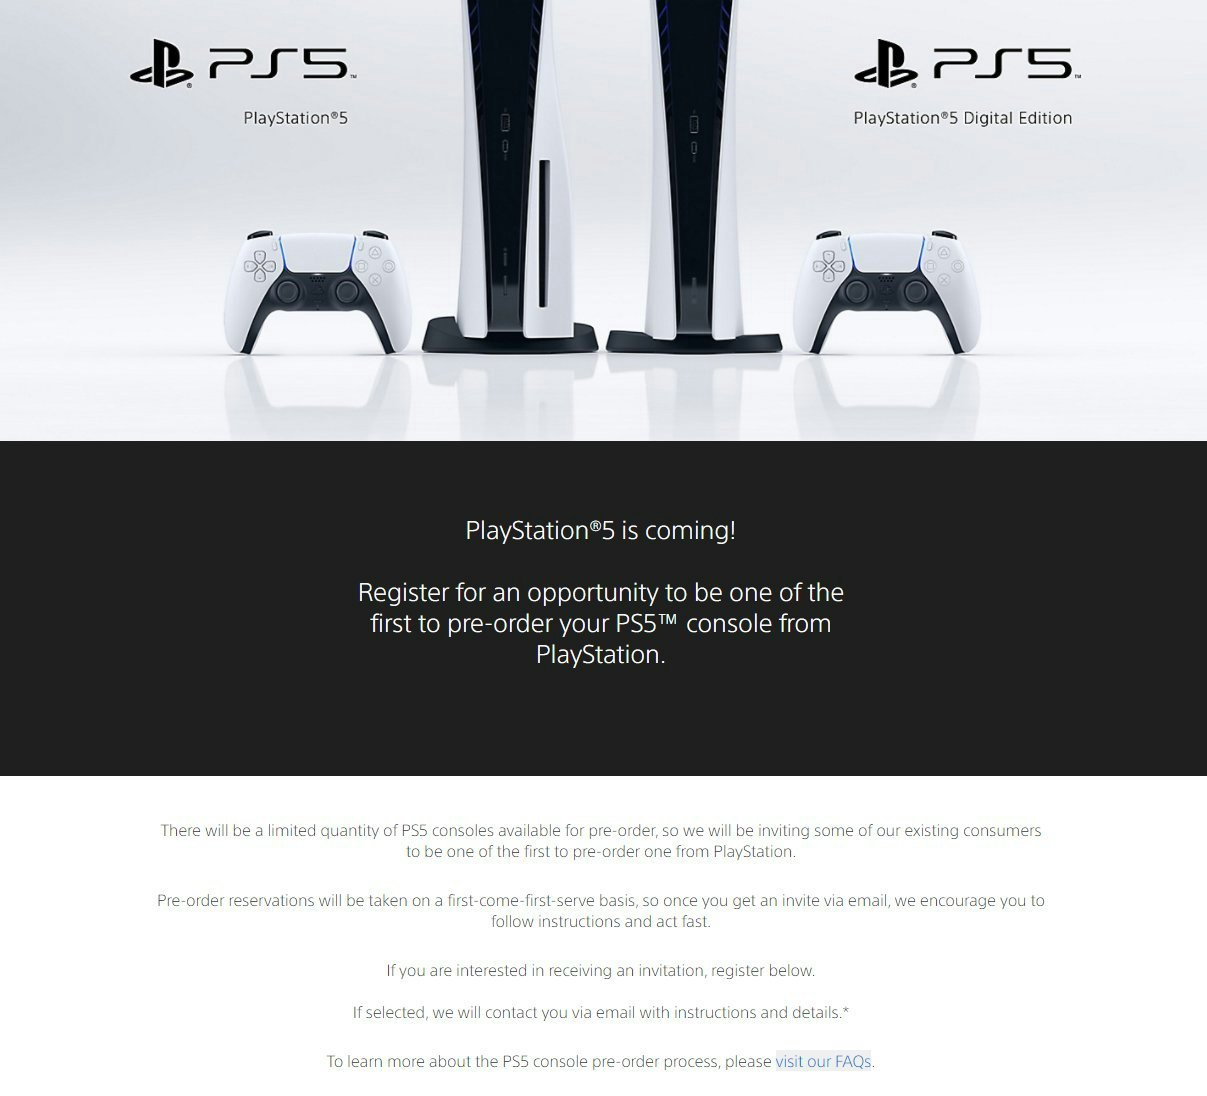 latest ps5 pre order news